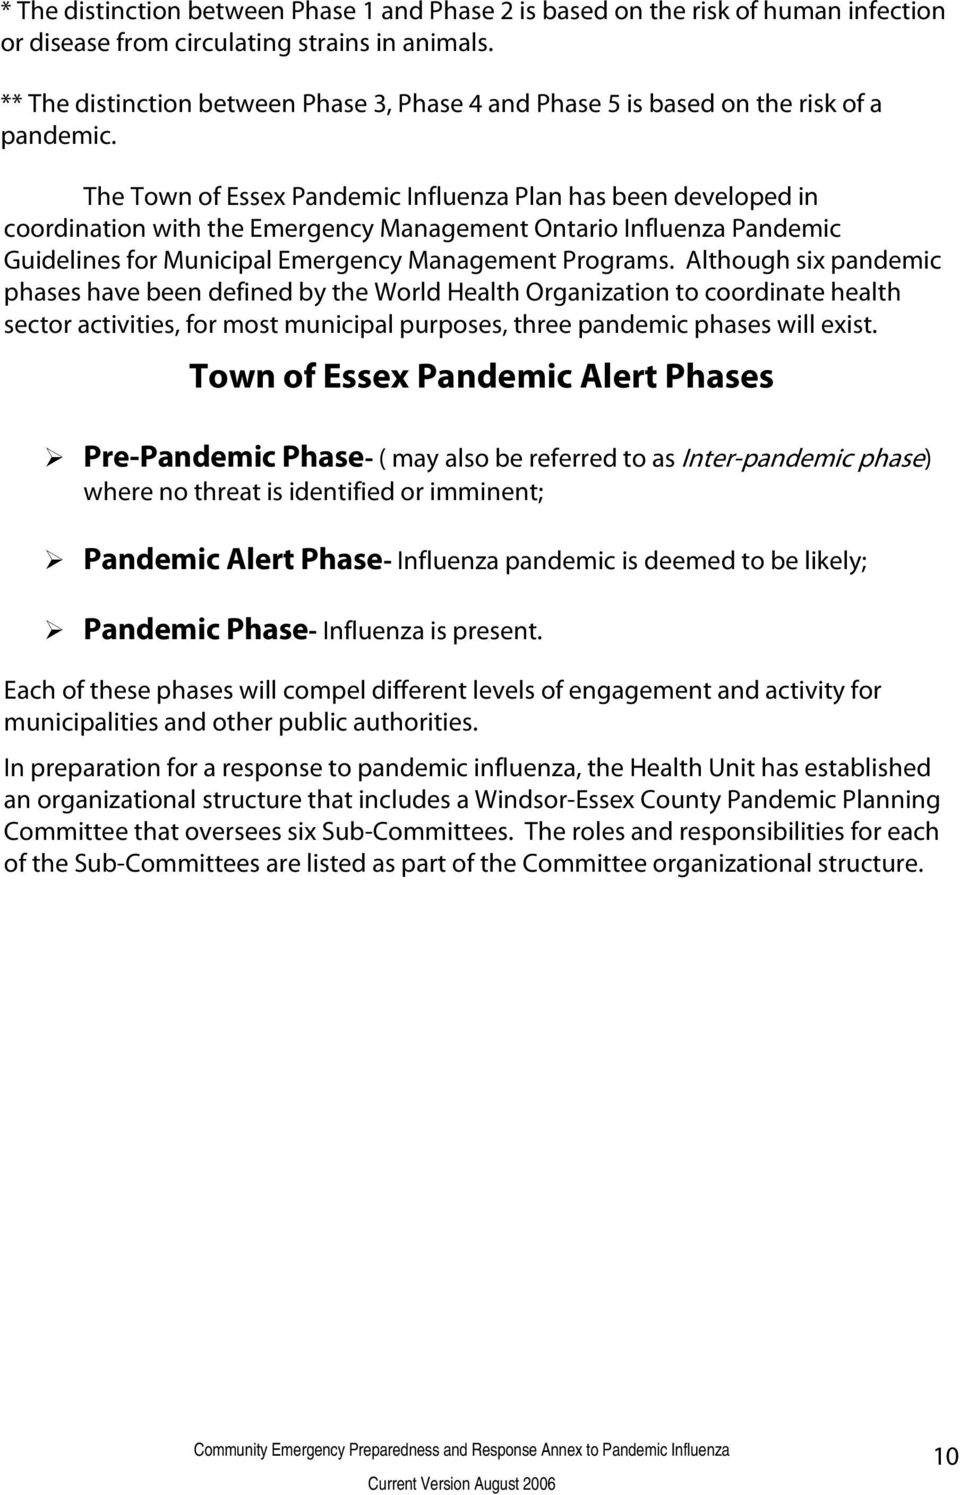 The Town of Essex Pandemic Influenza Plan has been developed in coordination with the Emergency Management Ontario Influenza Pandemic Guidelines for Municipal Emergency Management Programs.